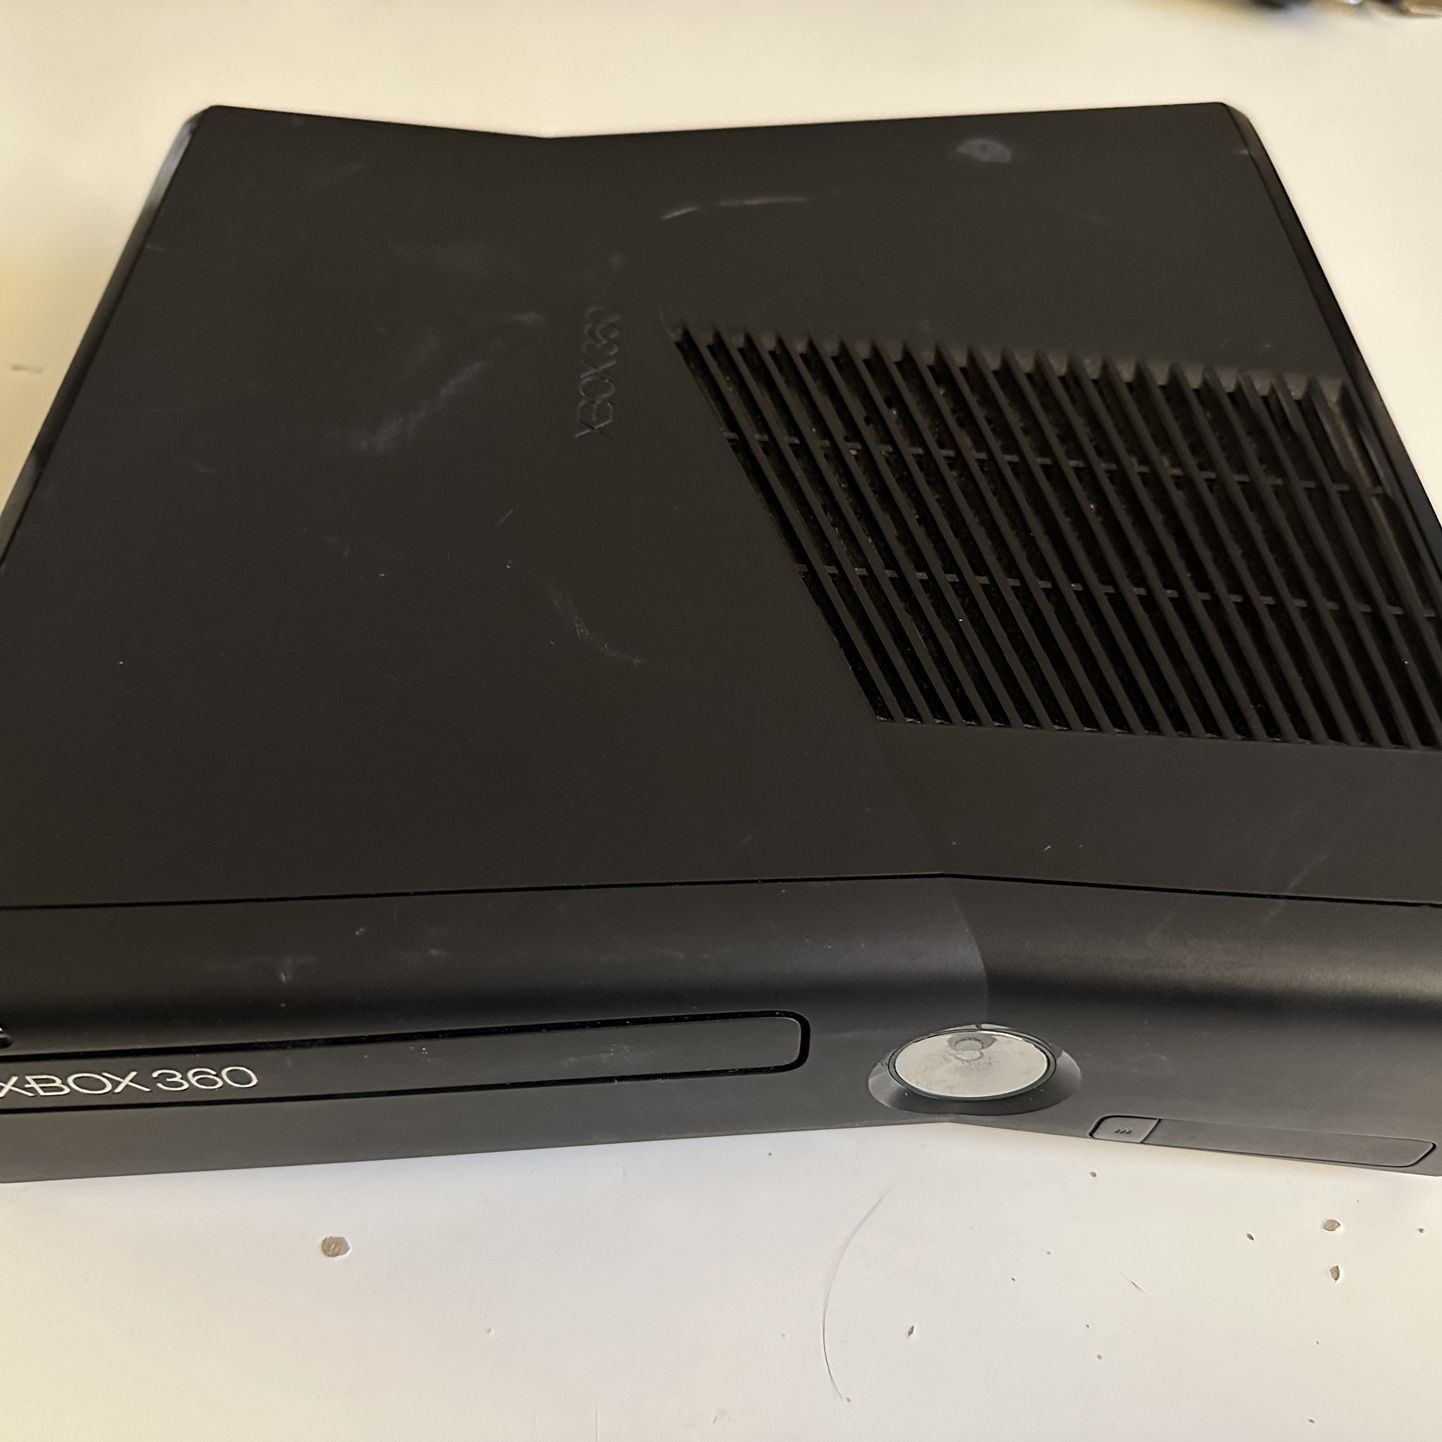 Xbox 360 (no power cable)